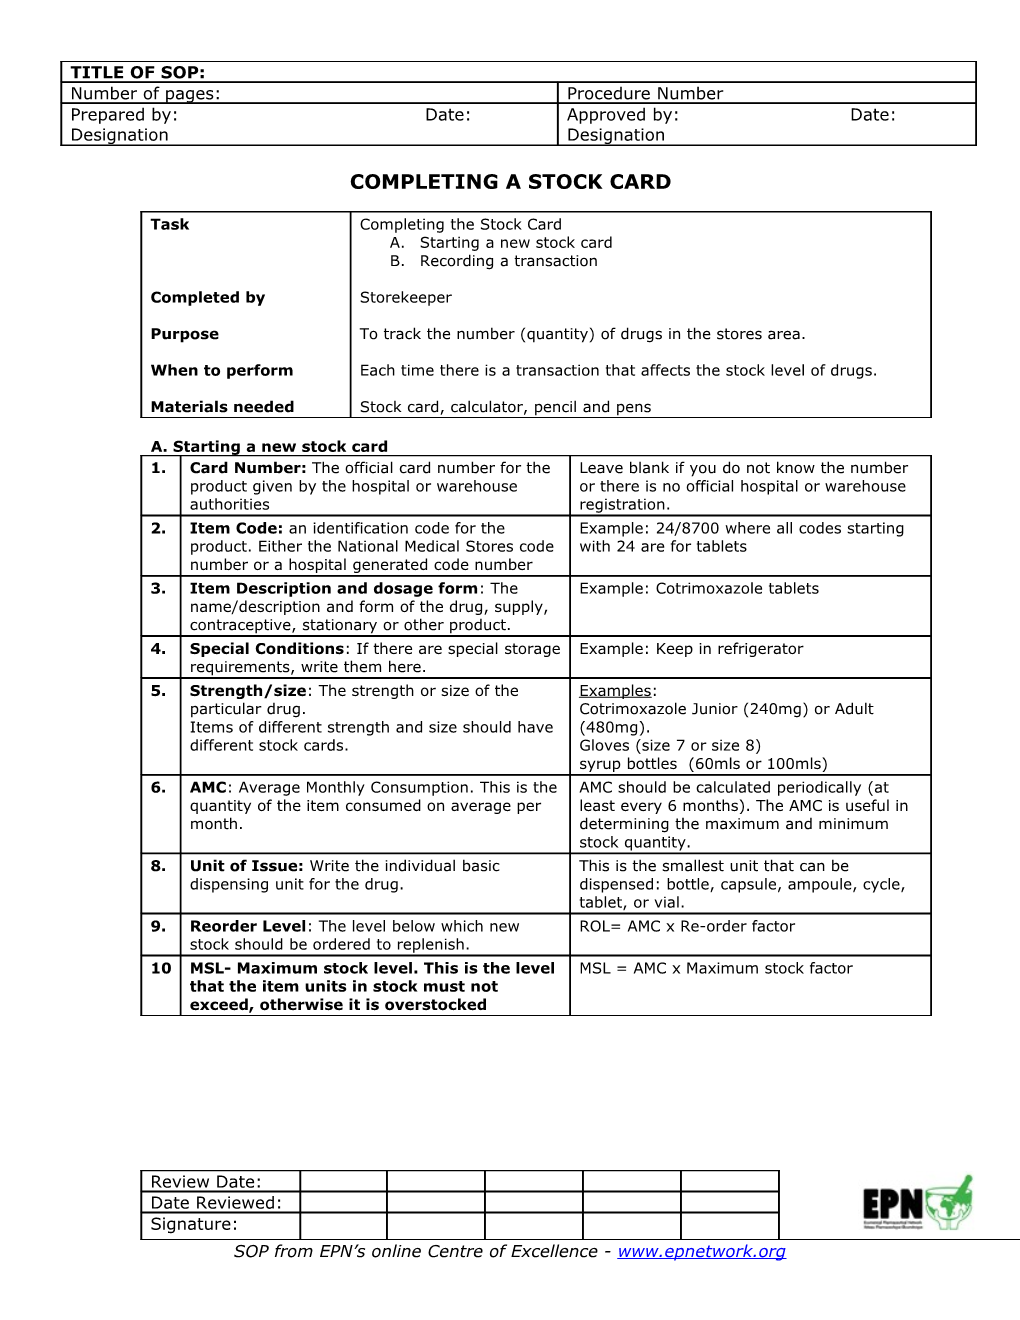 Standard Operating Procedure for COMPLETING a STOCK CARD